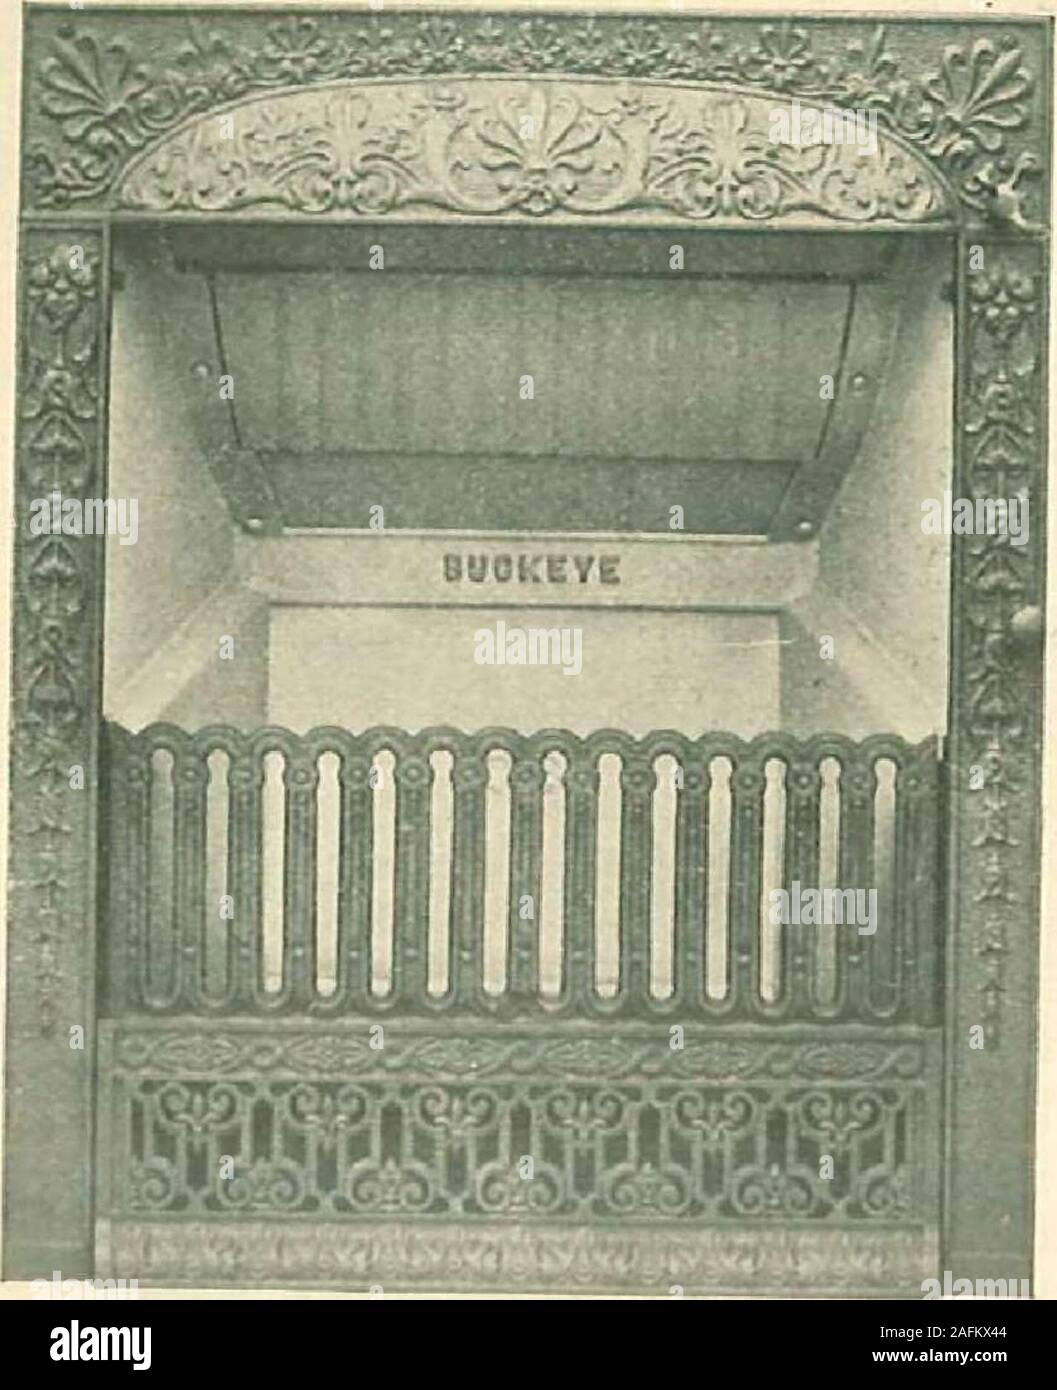 https://c8.alamy.com/comp/2AFKX44/grates-and-fireplace-fixtures-in-iron-and-brass-side-view-of-the-buckeye-grate-showing-curved-topand-damper-attachments-open-view-of-the-buckeye-grate-showing-curved-topwhich-reflects-the-heat-into-the-room-the-buckeye-grate-tgratvs-trw-made-wiul-curved-topgt-ajld-our-iwgtved-thumb-screw-method-of-opening-upper-dam-same-as-m-the-monarch-and-for-a-medium-price-grate-suitable-for-soft-coal-has-no-kalithpin-stjxer-ftomtet-t-v-ate-madtf-tm-nst-kmt-sthese-grates-diffei-from-the-monarch-in-that-they-have-fire-tile-in-back-only-with-iron-sides-and-alp-ttrssir-2AFKX44.jpg